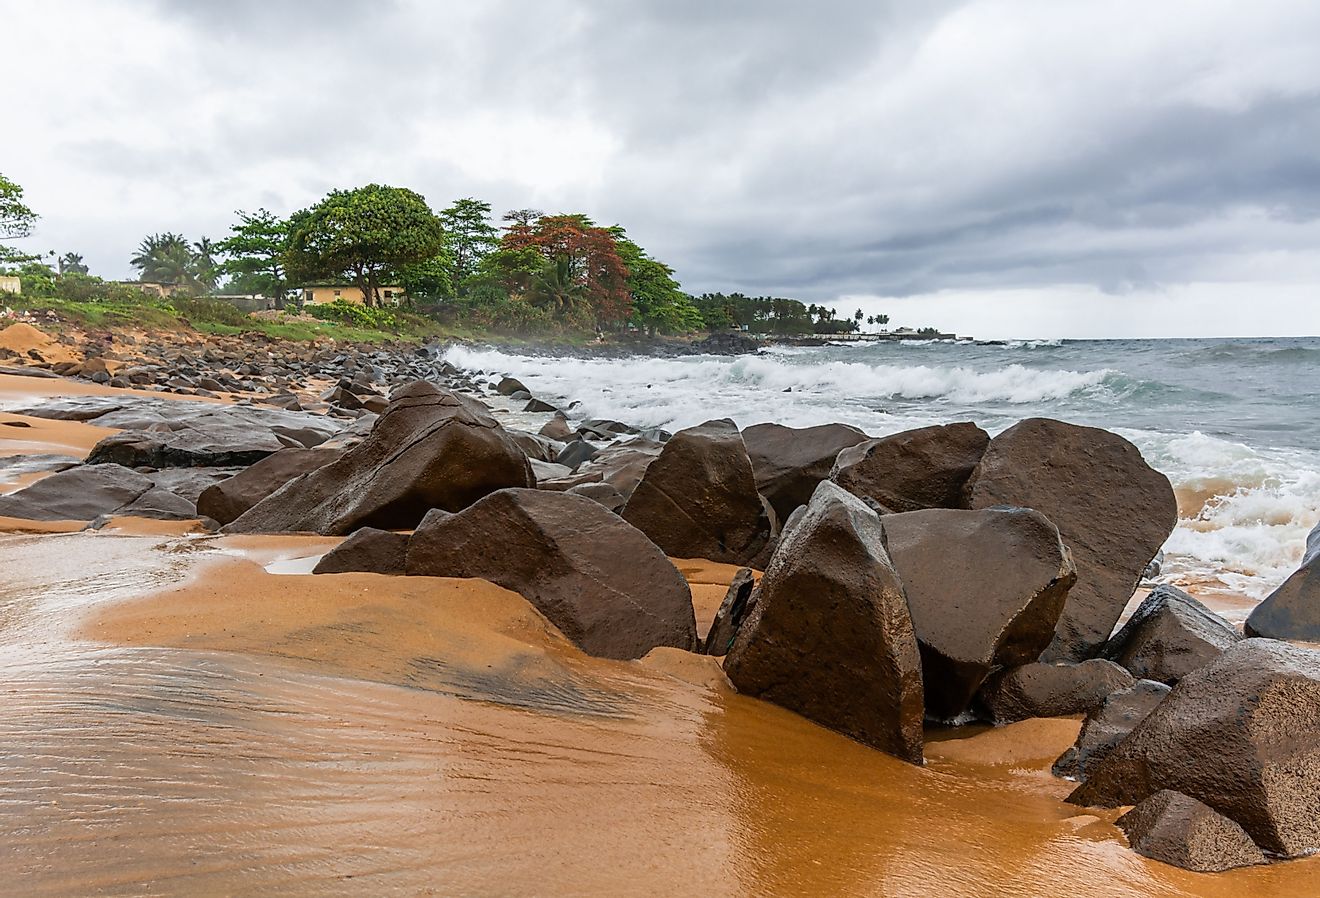 Beach with red sand and red rocks with a dramatic sky in Congo Town, Monrovia, Liberia. Image credit Dan_Manila